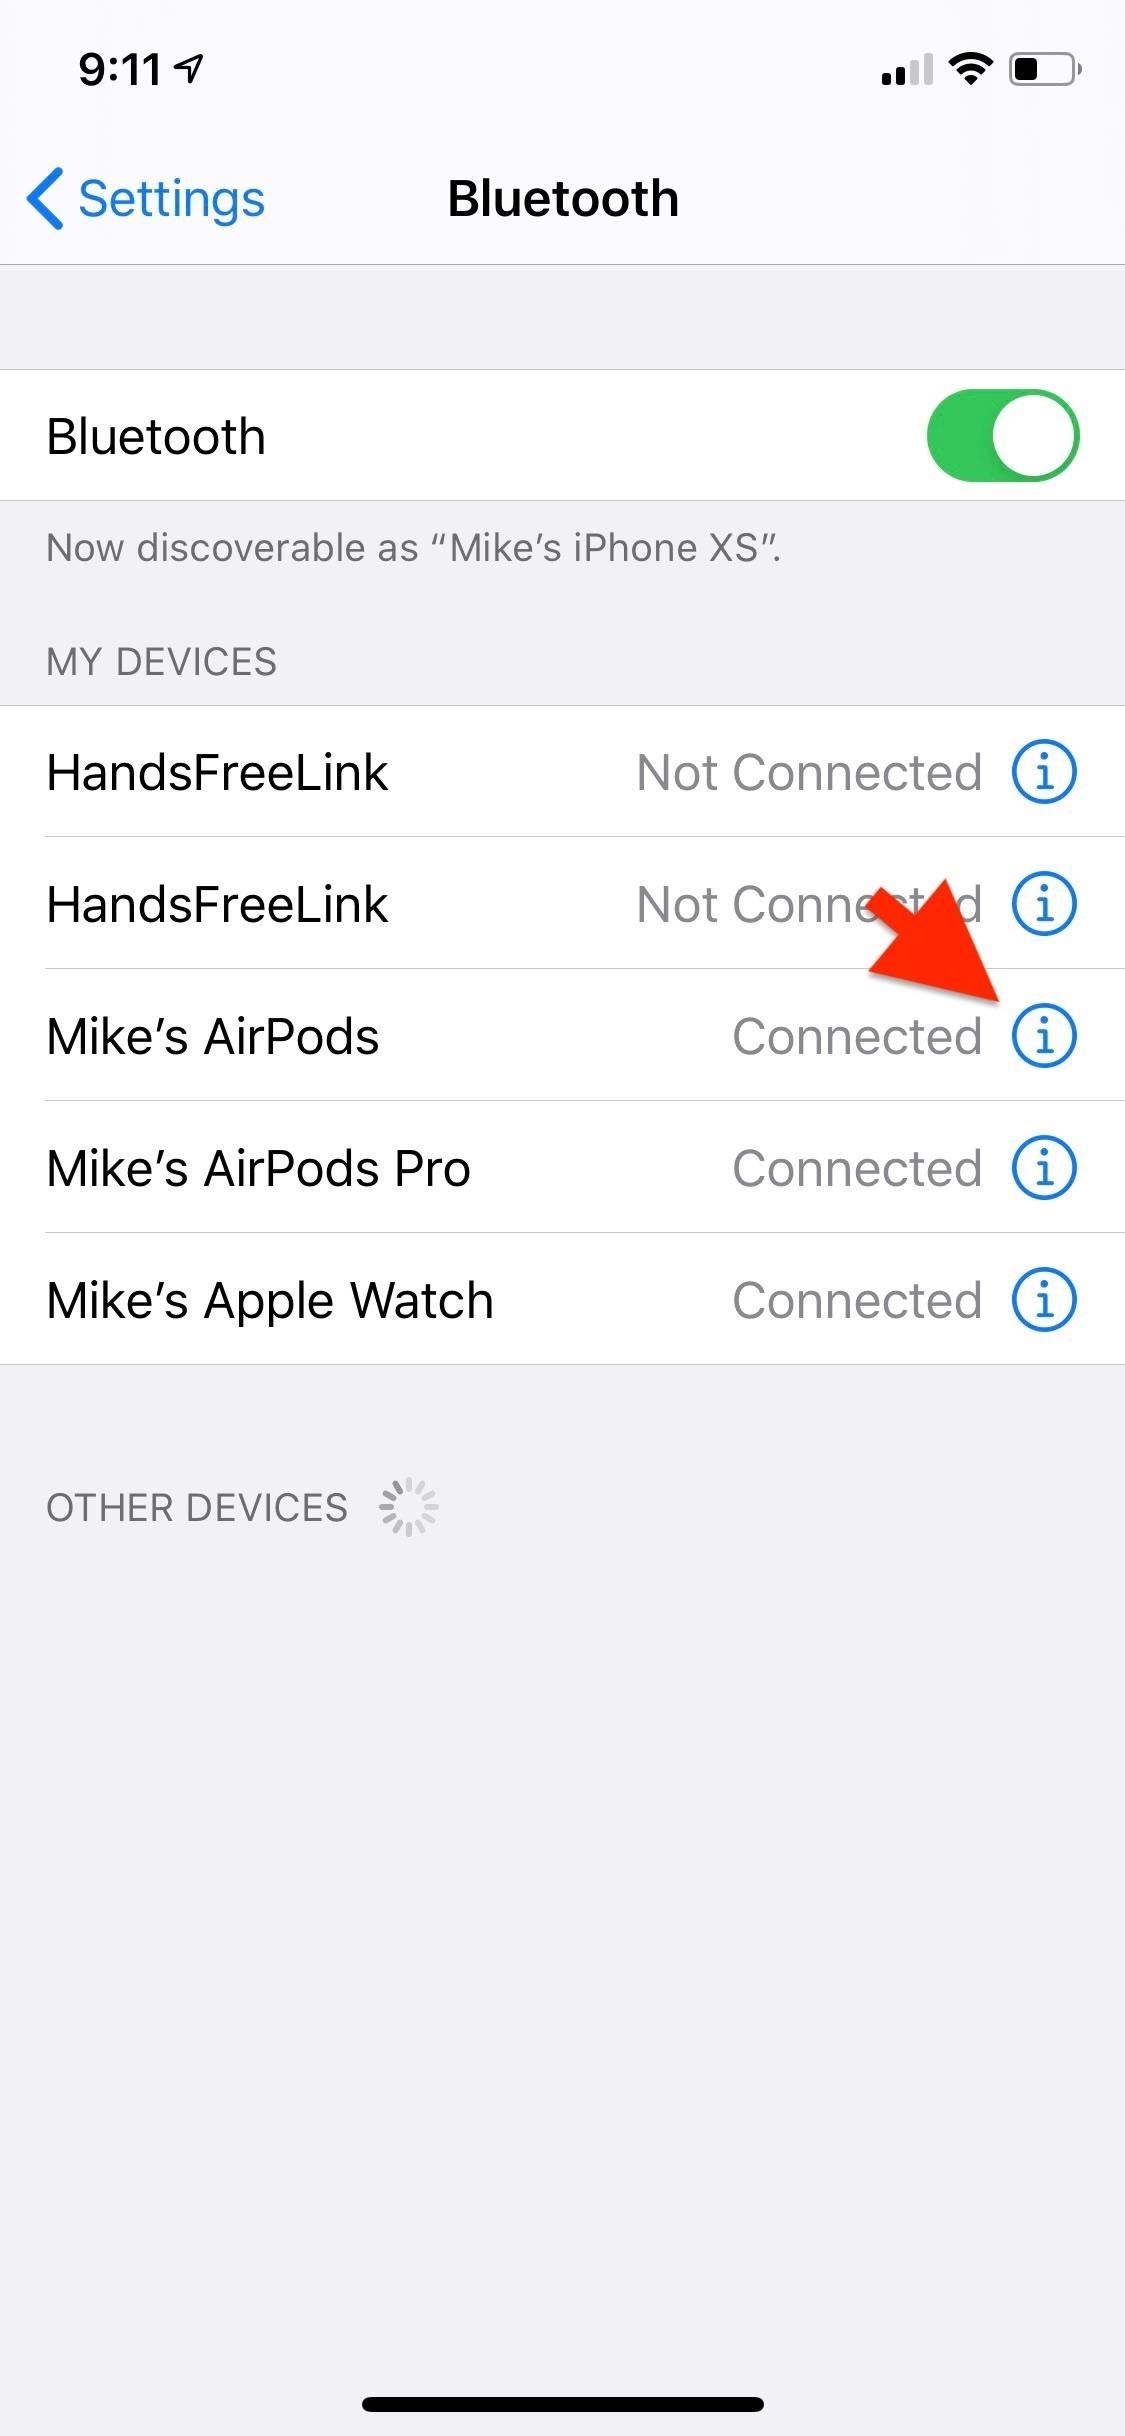 How to Stop Your AirPods from Pausing Music & Other Audio When You Take Them Out of Your Ears